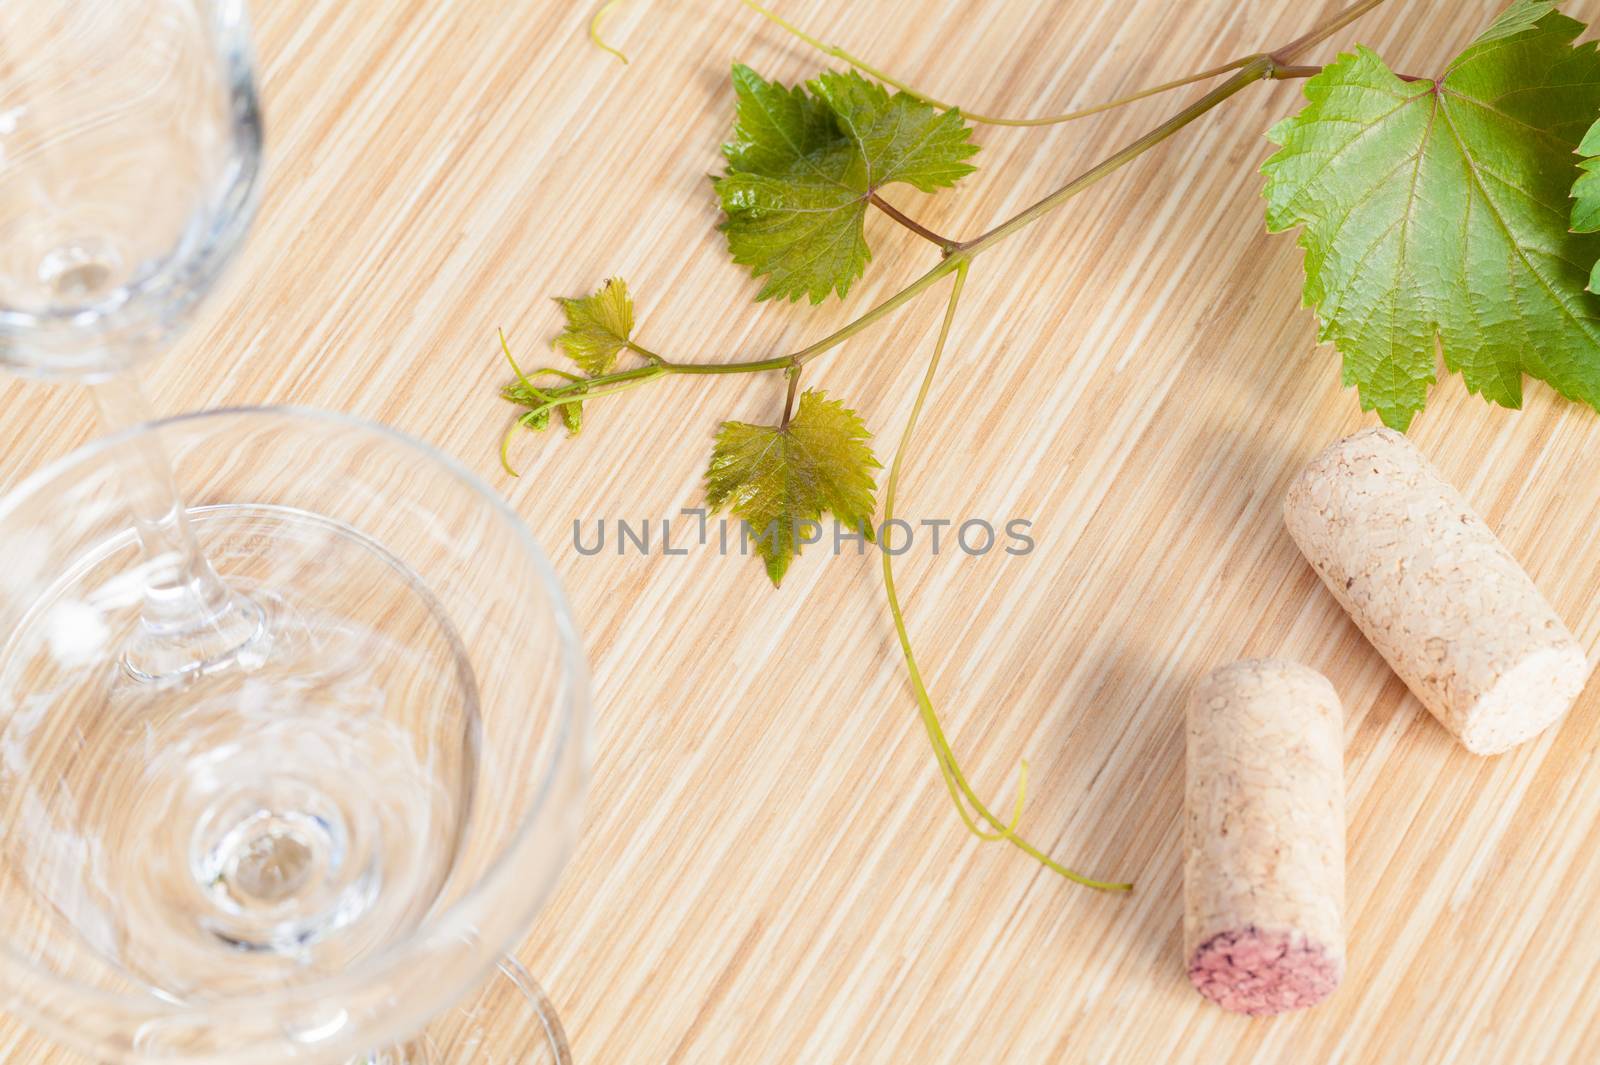 Wine bottle with vine and wine cork put on the board.